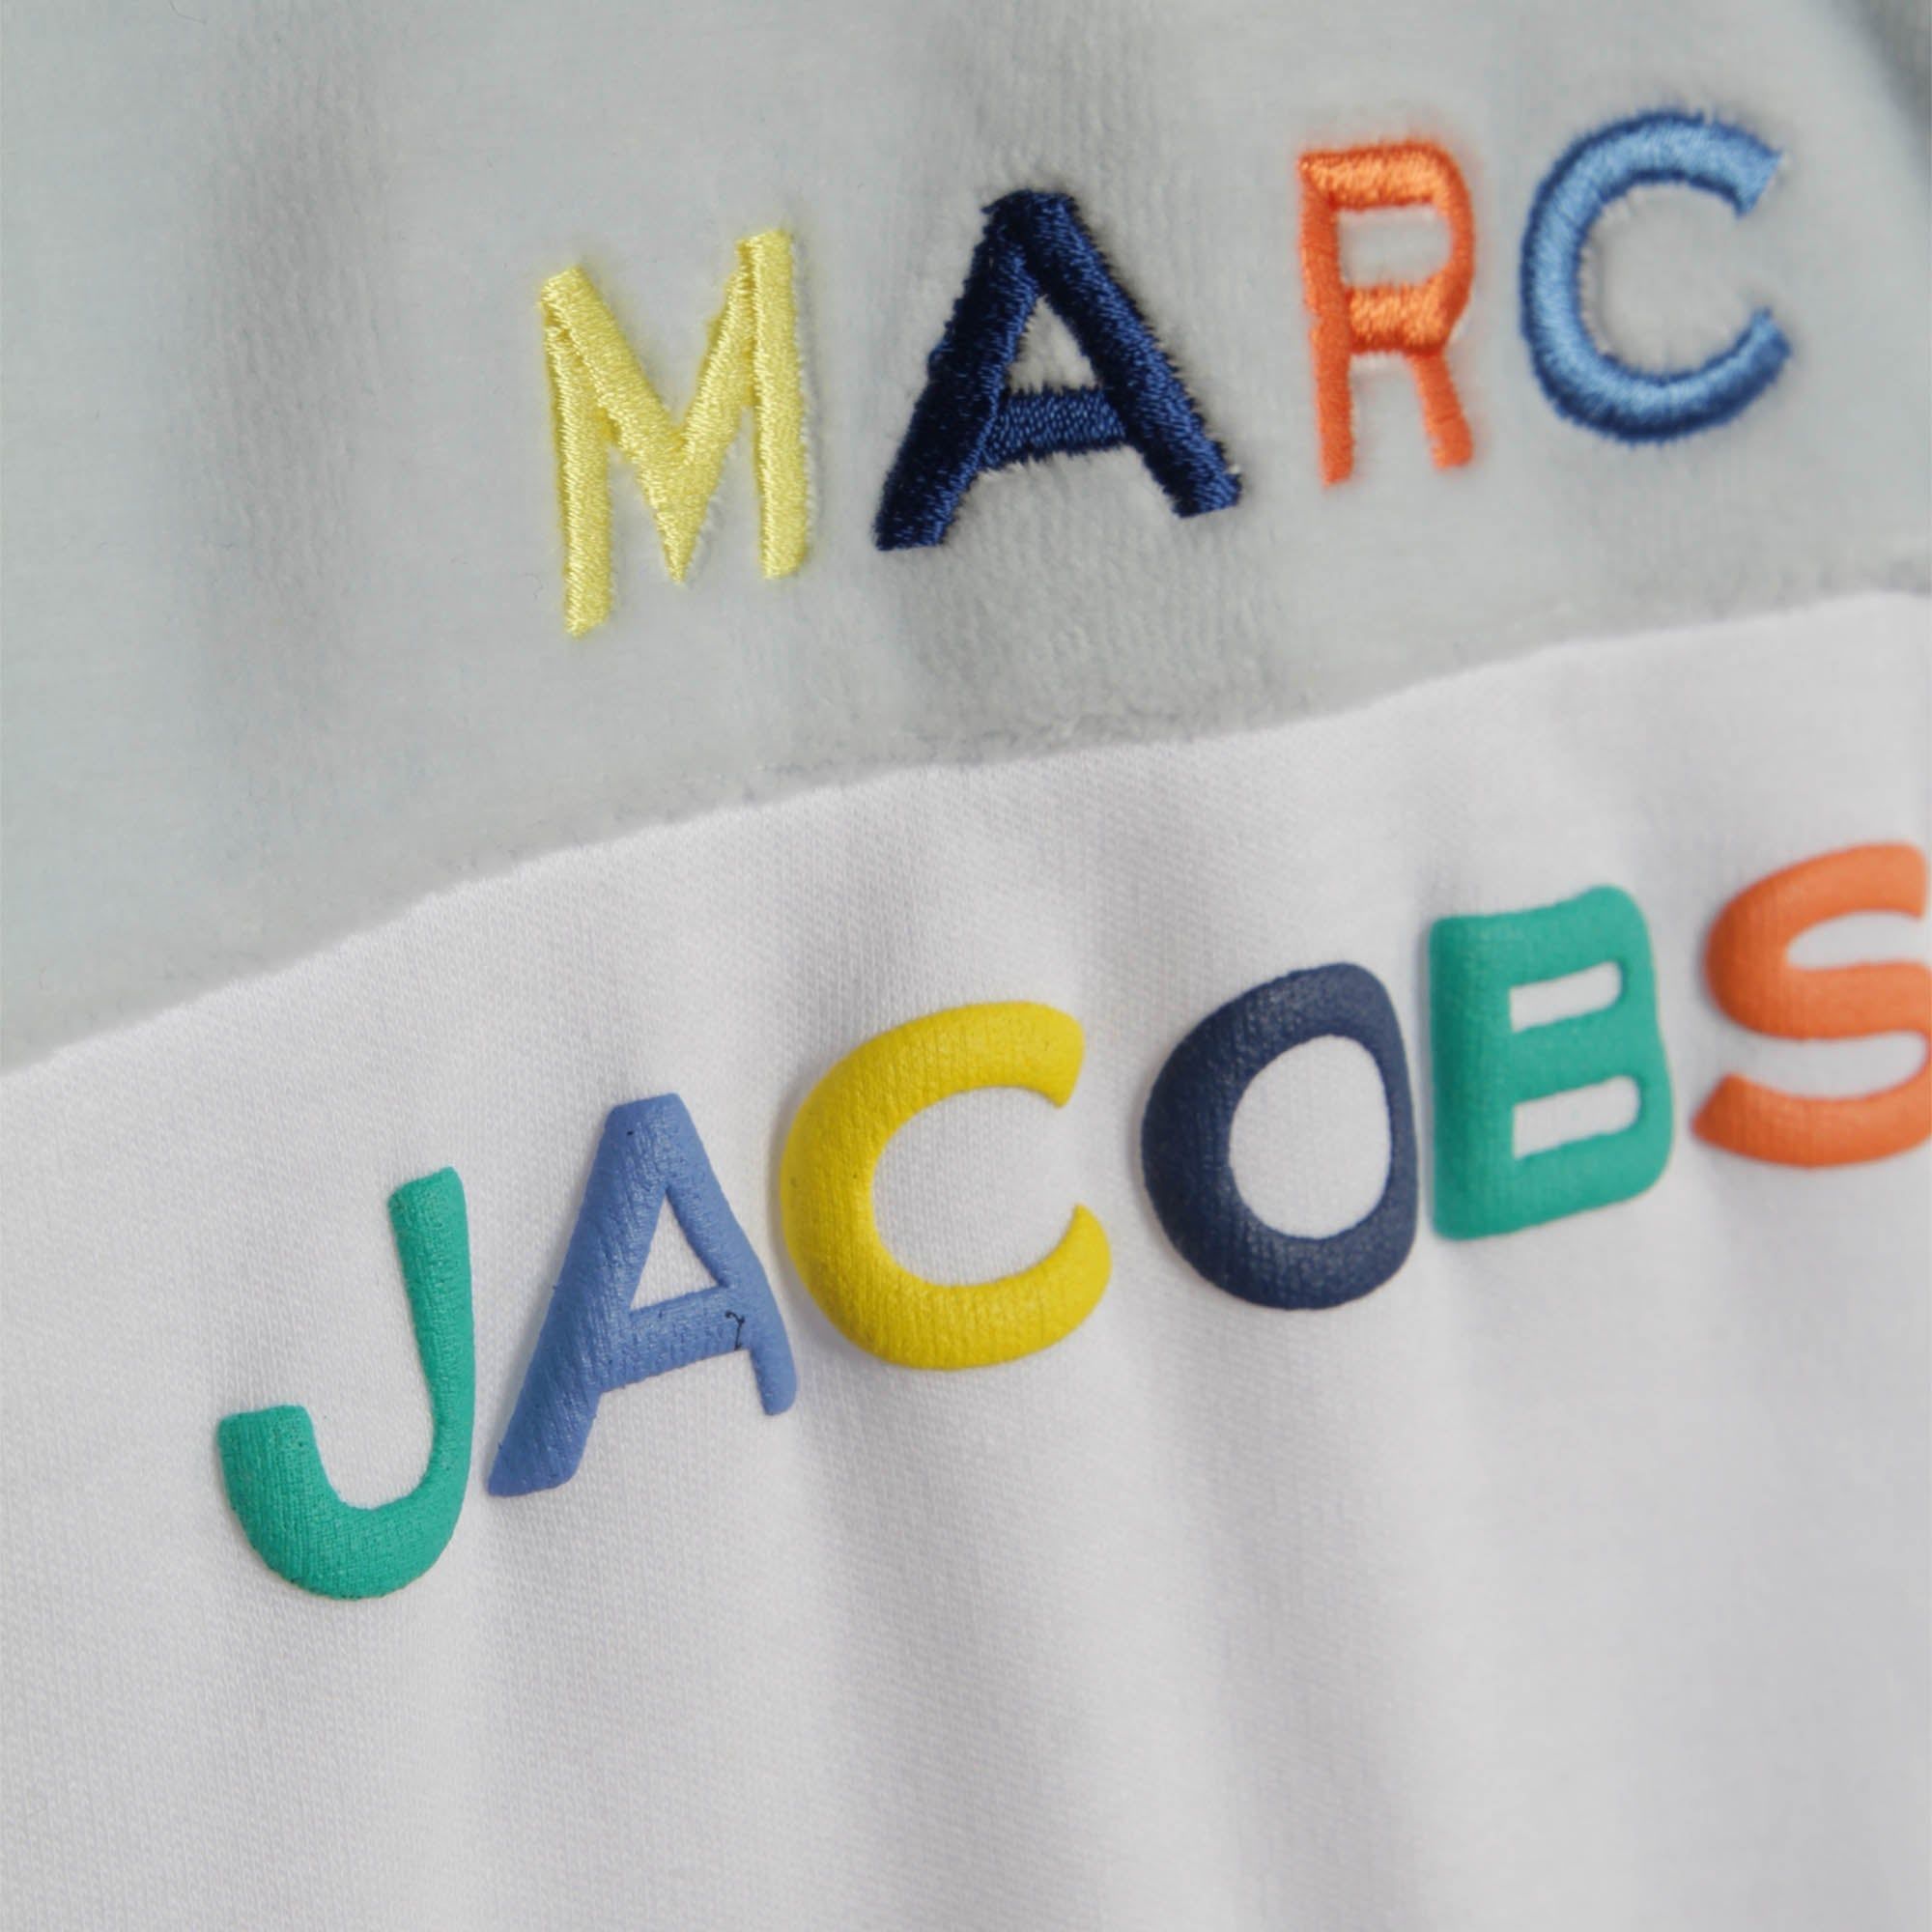 EMBROIDERED LOGO OVERALL